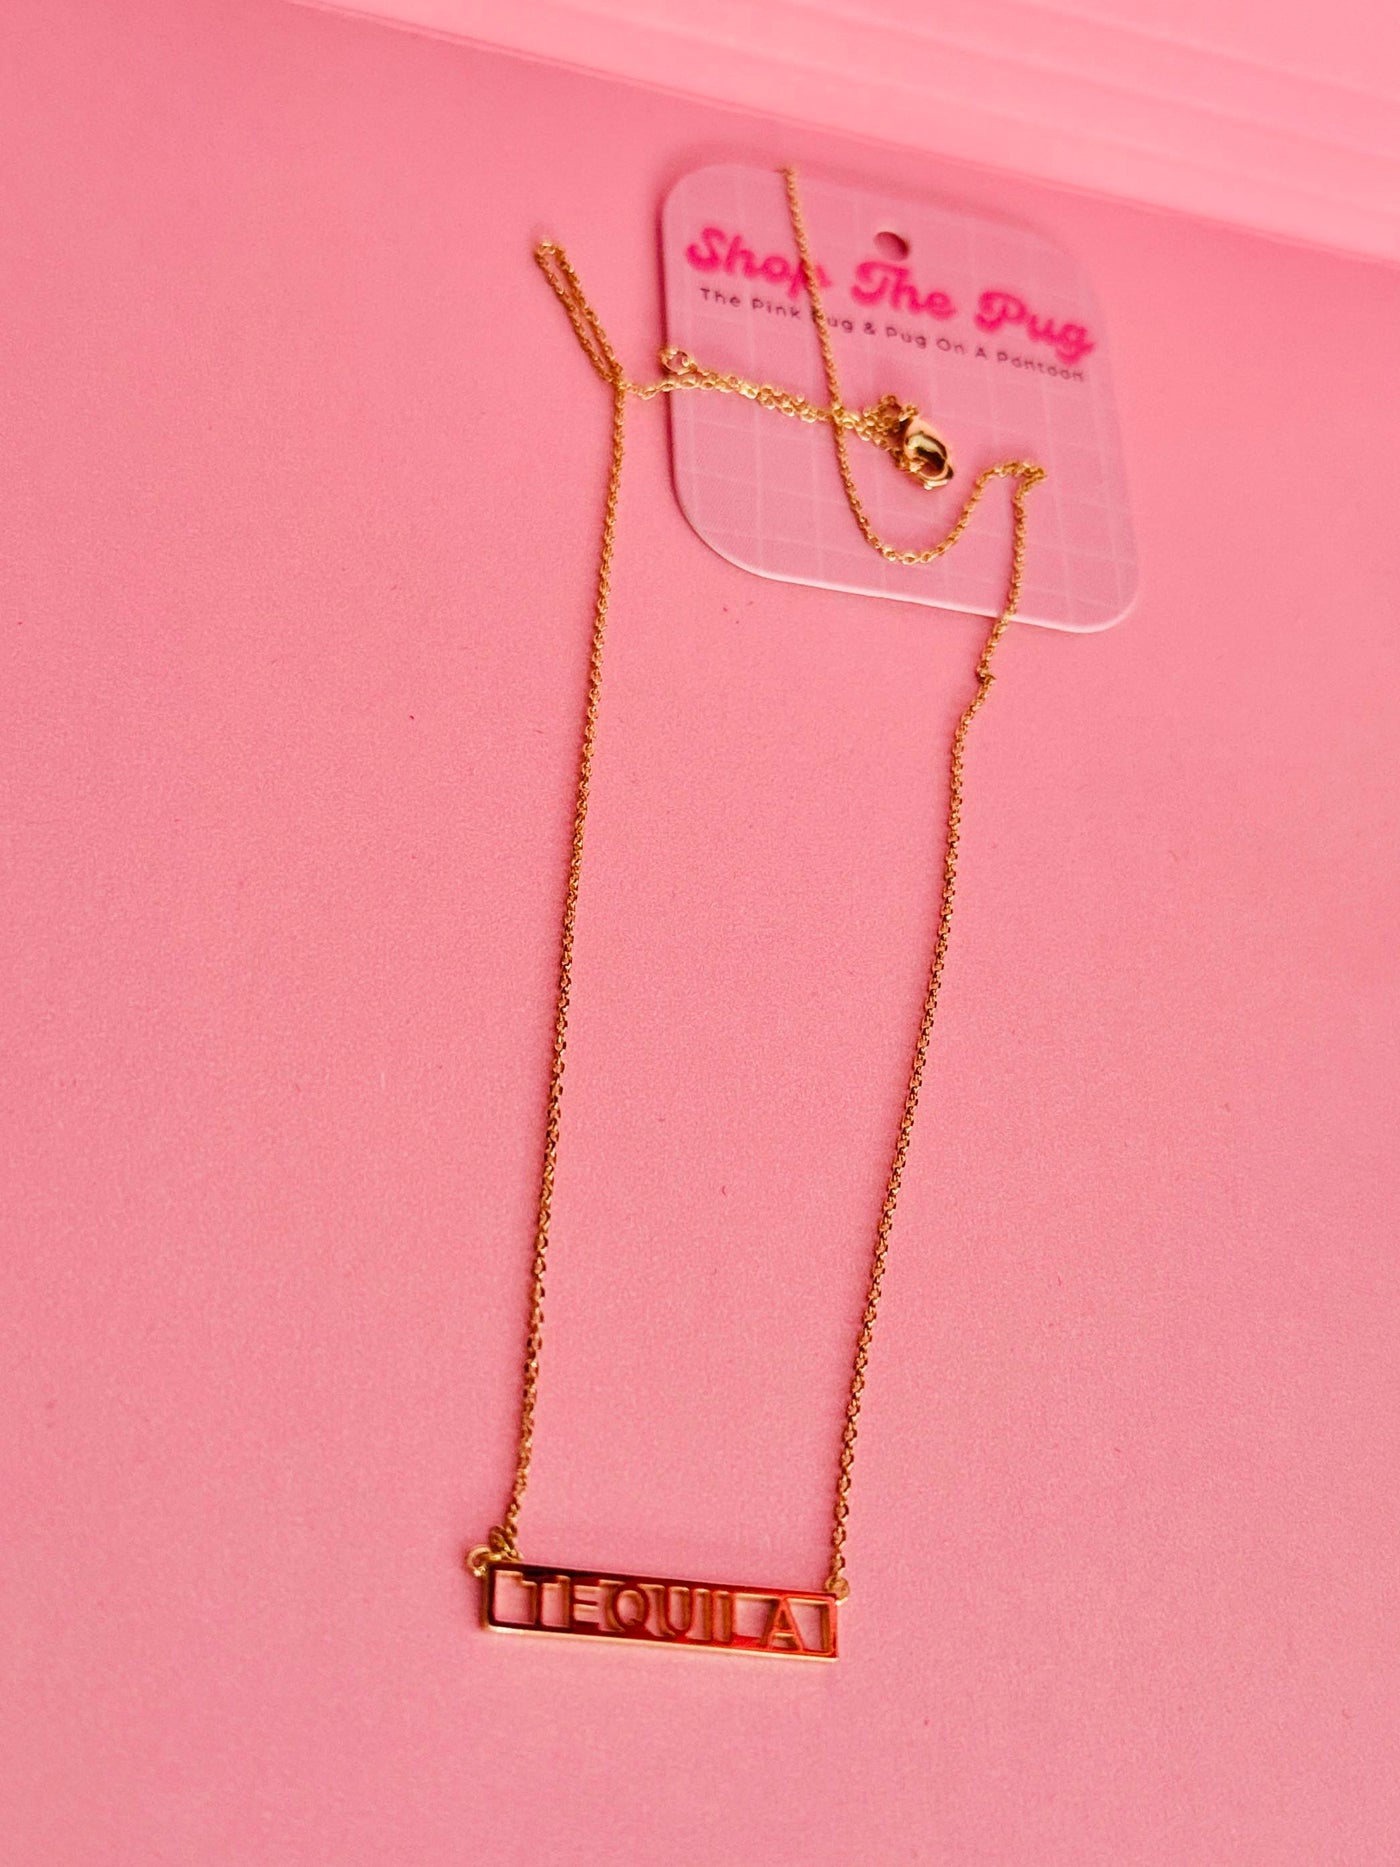 Tequila Necklace